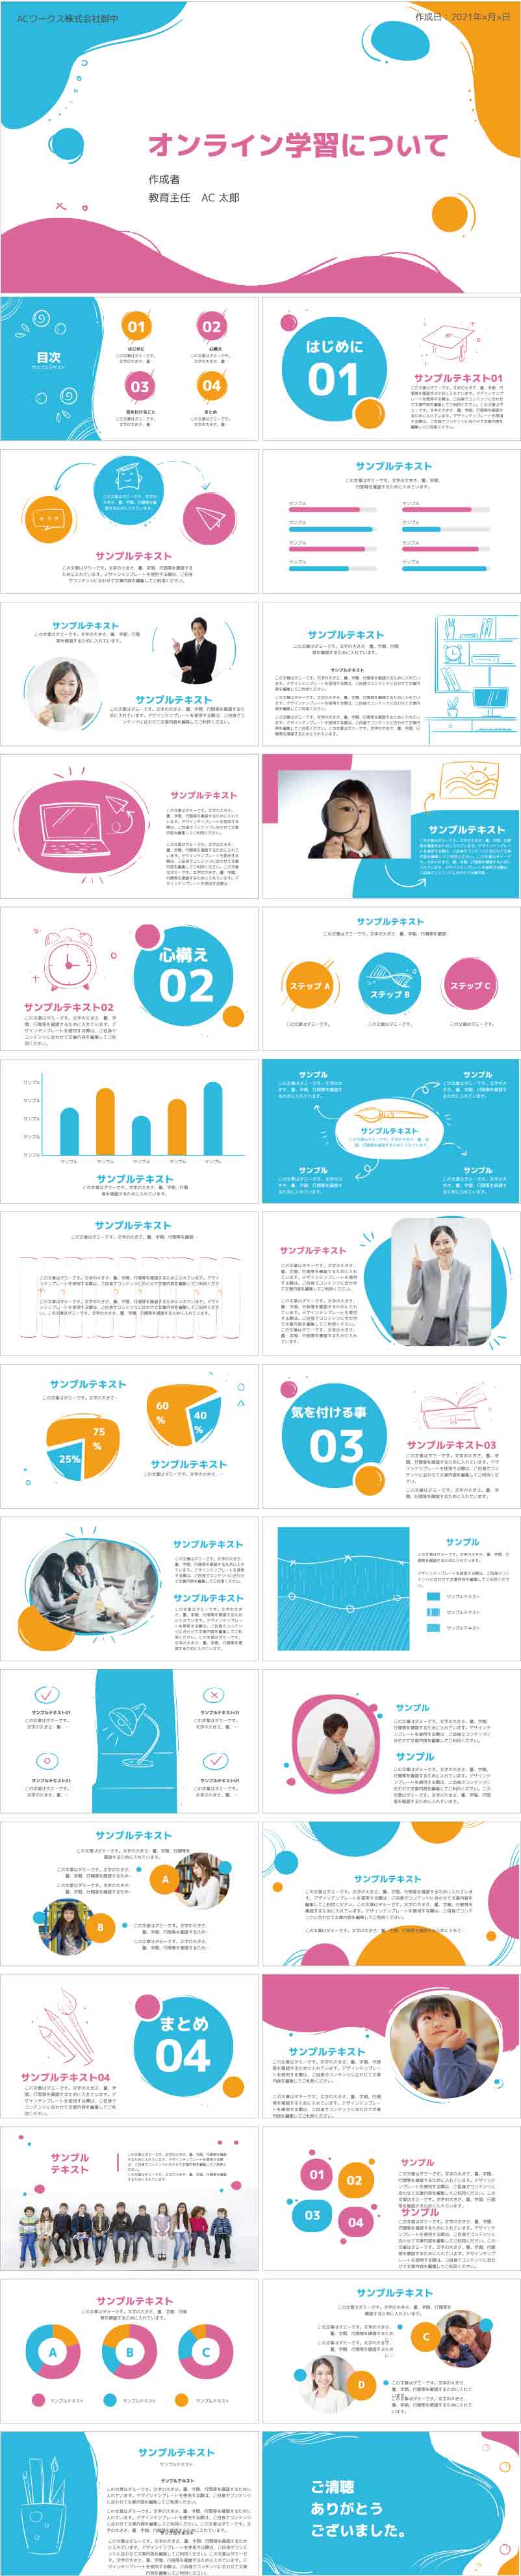 PowerPoint template vol.73